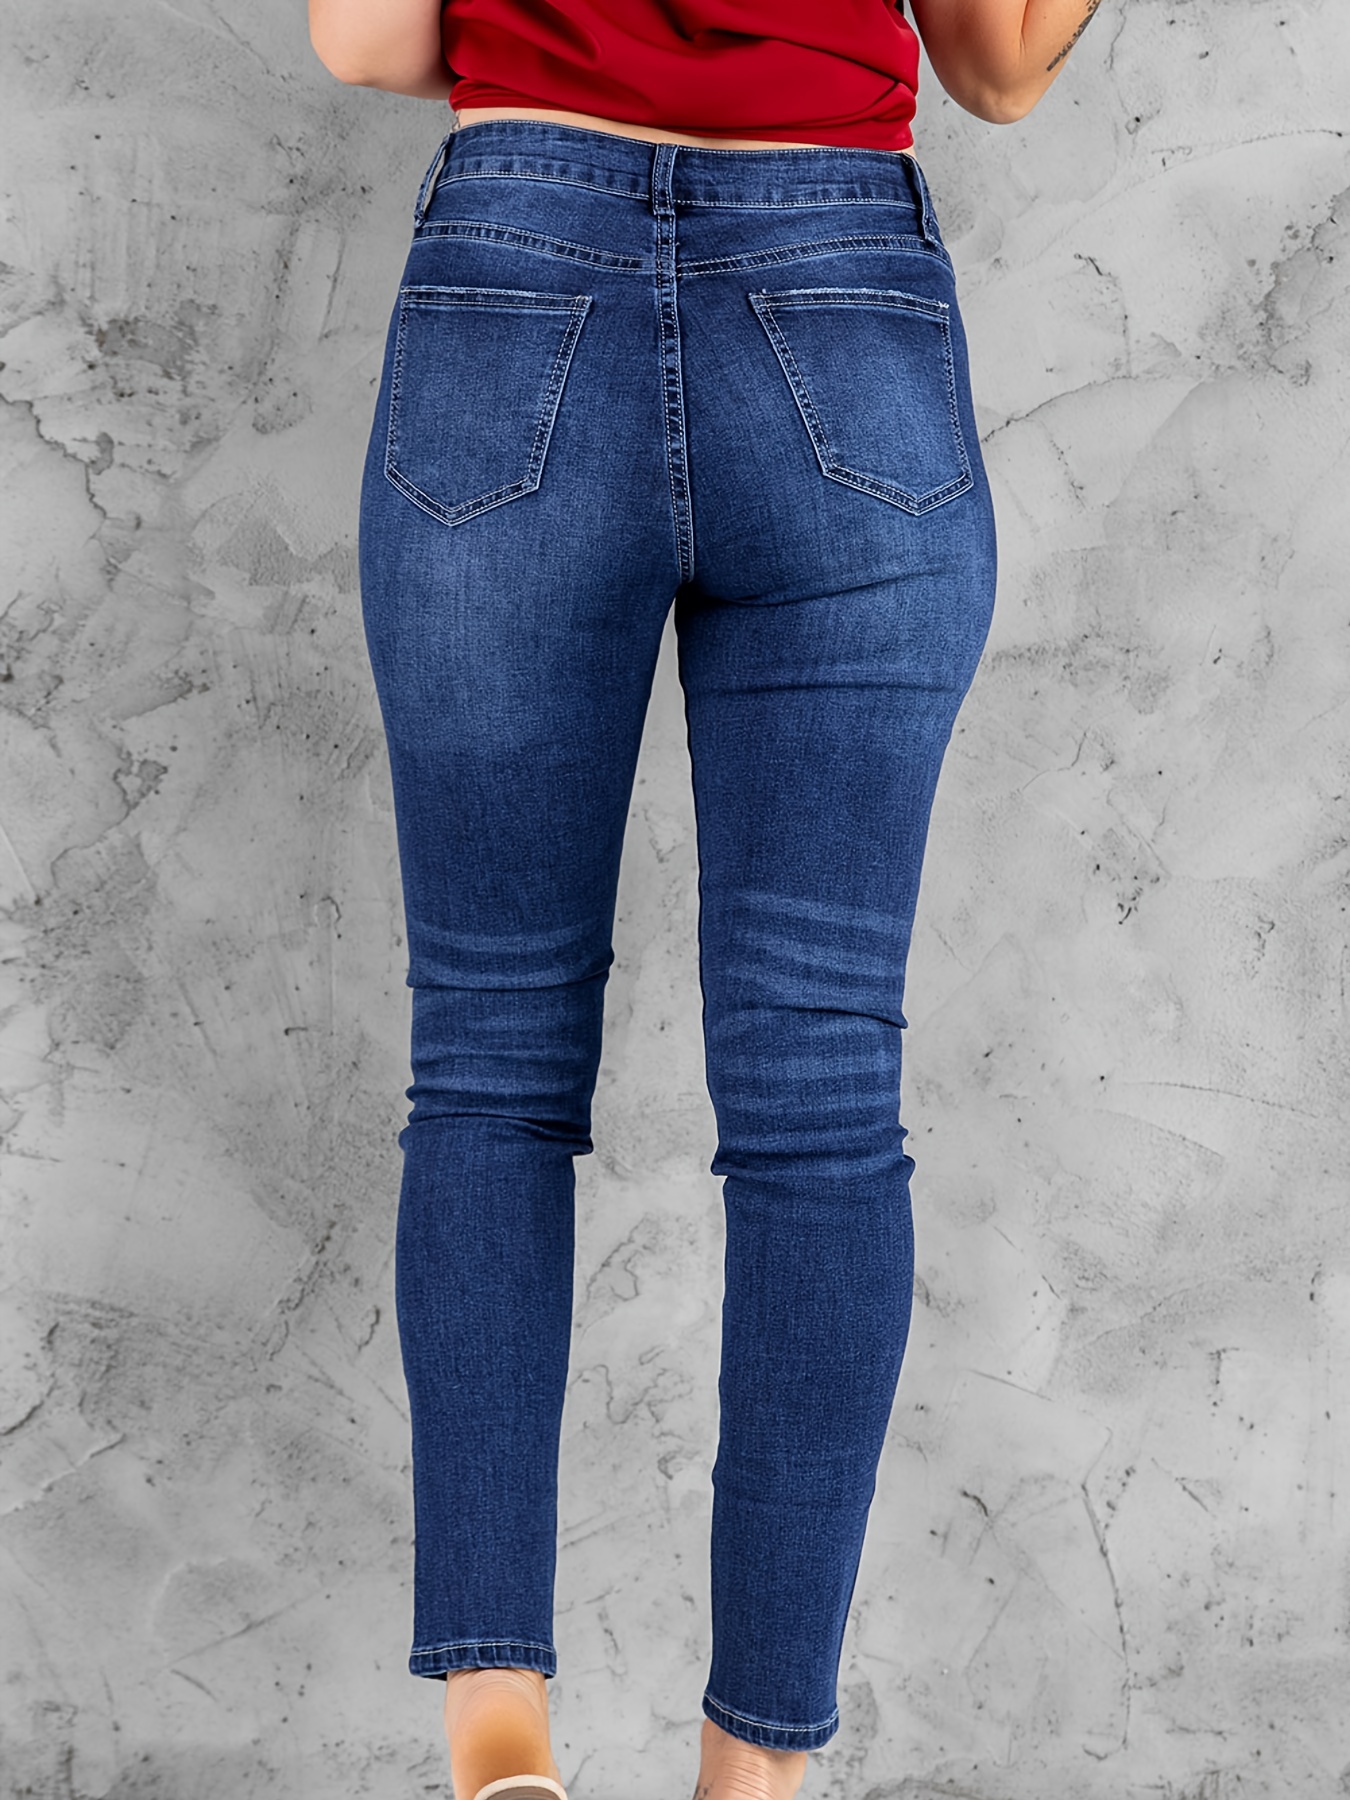 Single Breasted Button Skinny Jeans, Slim Fit Slant Pockets Whiskering  Tight Jeans, Women's Denim Jeans & Clothing